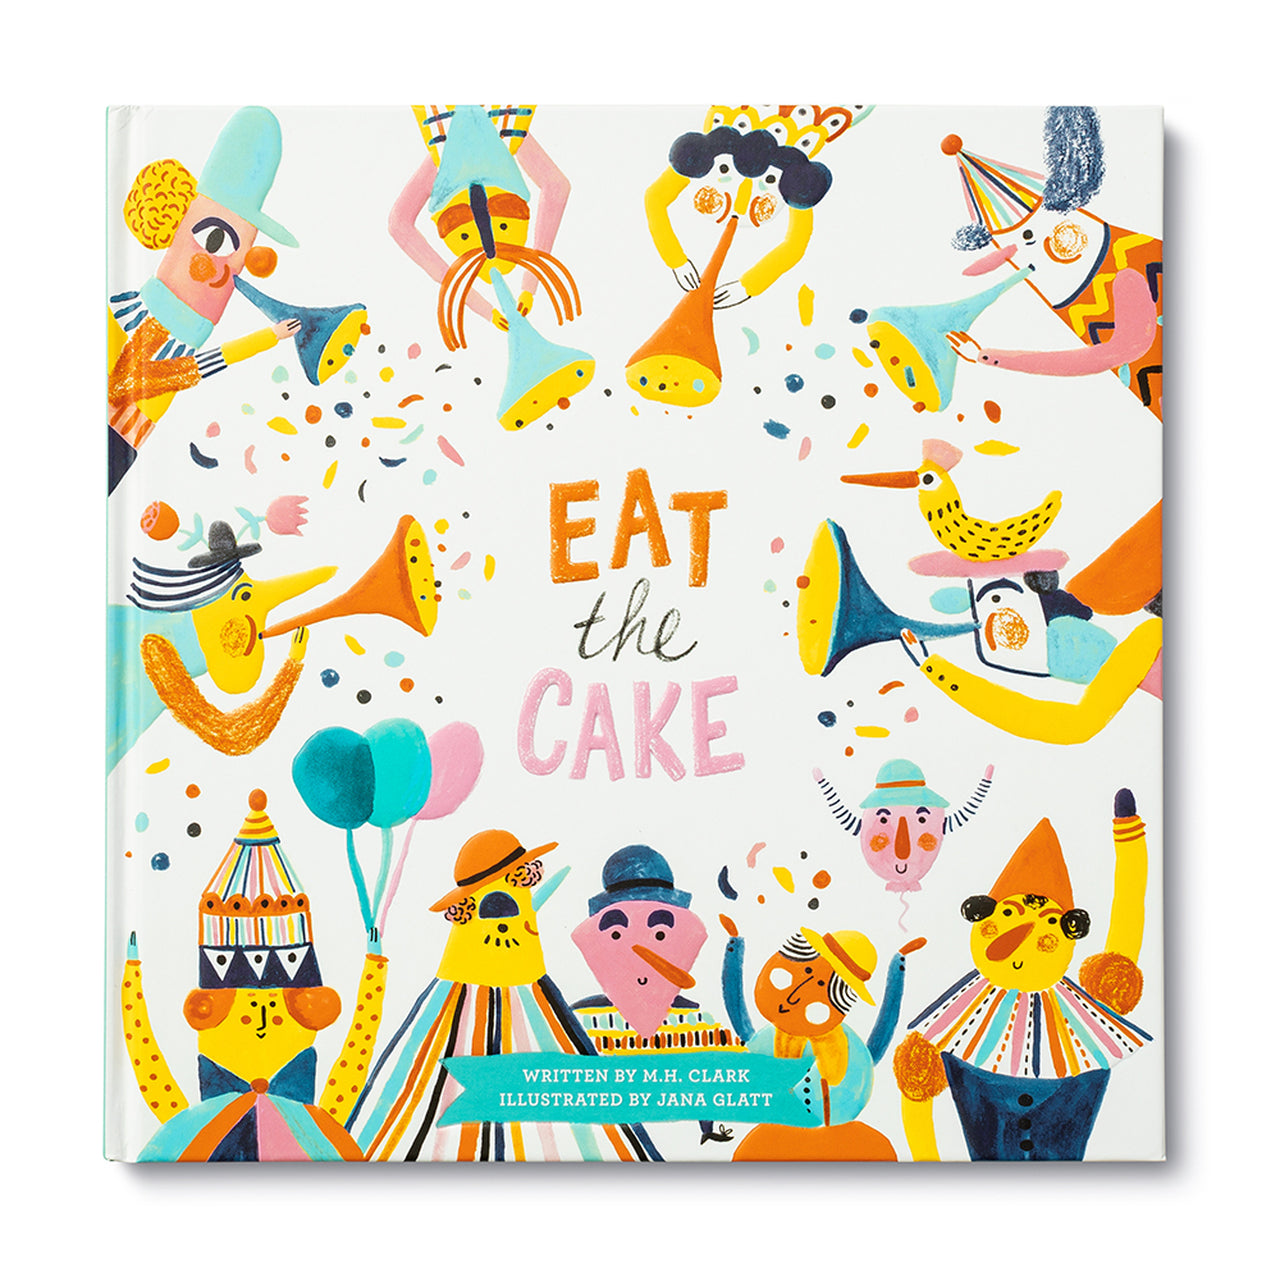 Eat the Cake by M.H. Clark